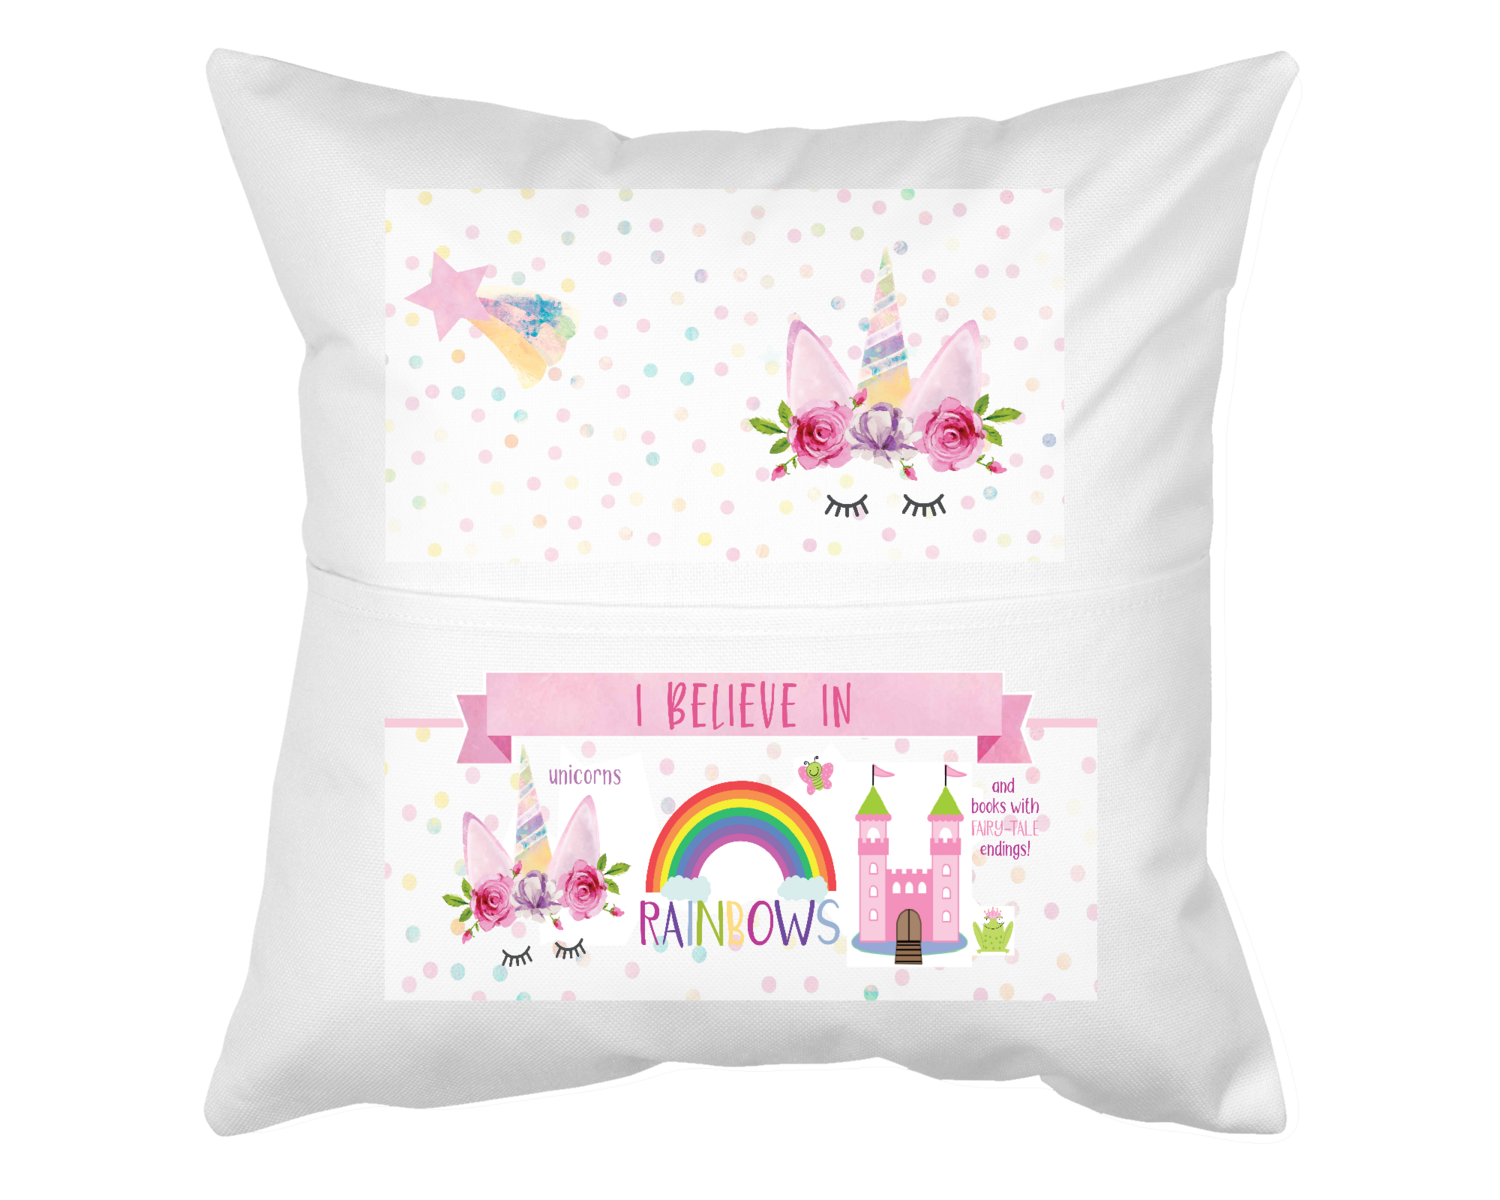 Pillow With Pocket: I BELIEVE IN UNICORNS, RAINBOWS AND BOOKS WITH FAIRY-TALE ENDINGS